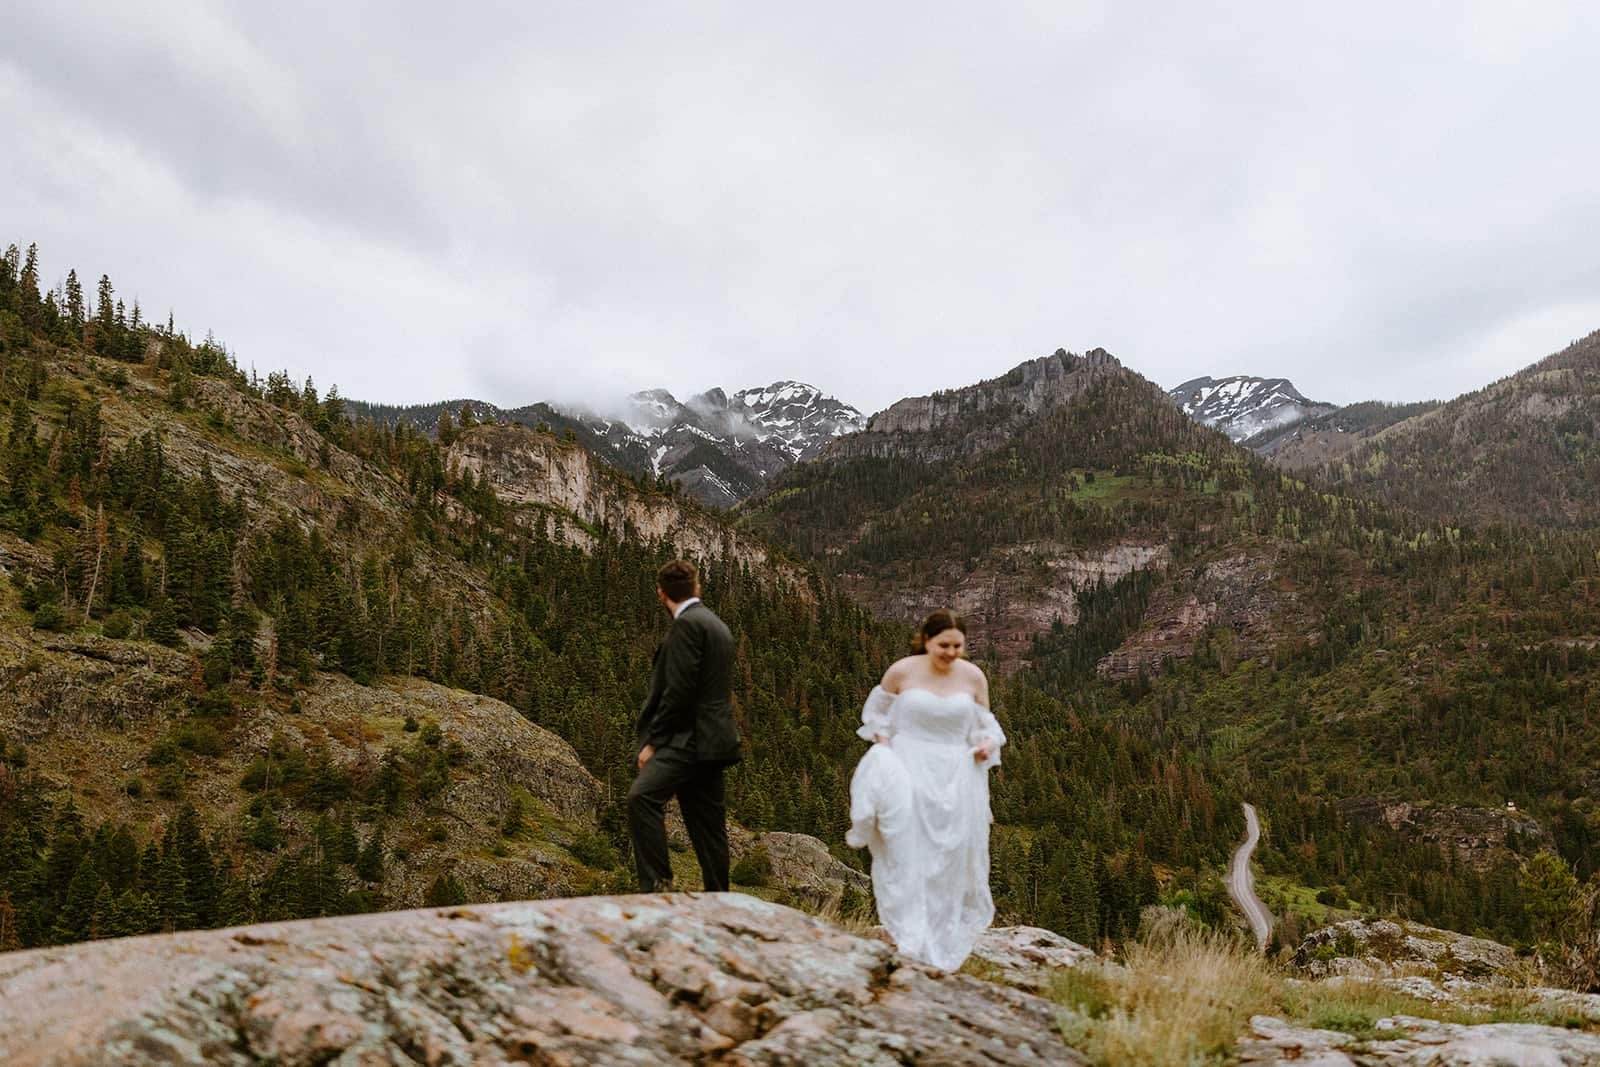 A man and woman explore an overlook off the Million Dollar Highway outside of Ridgway